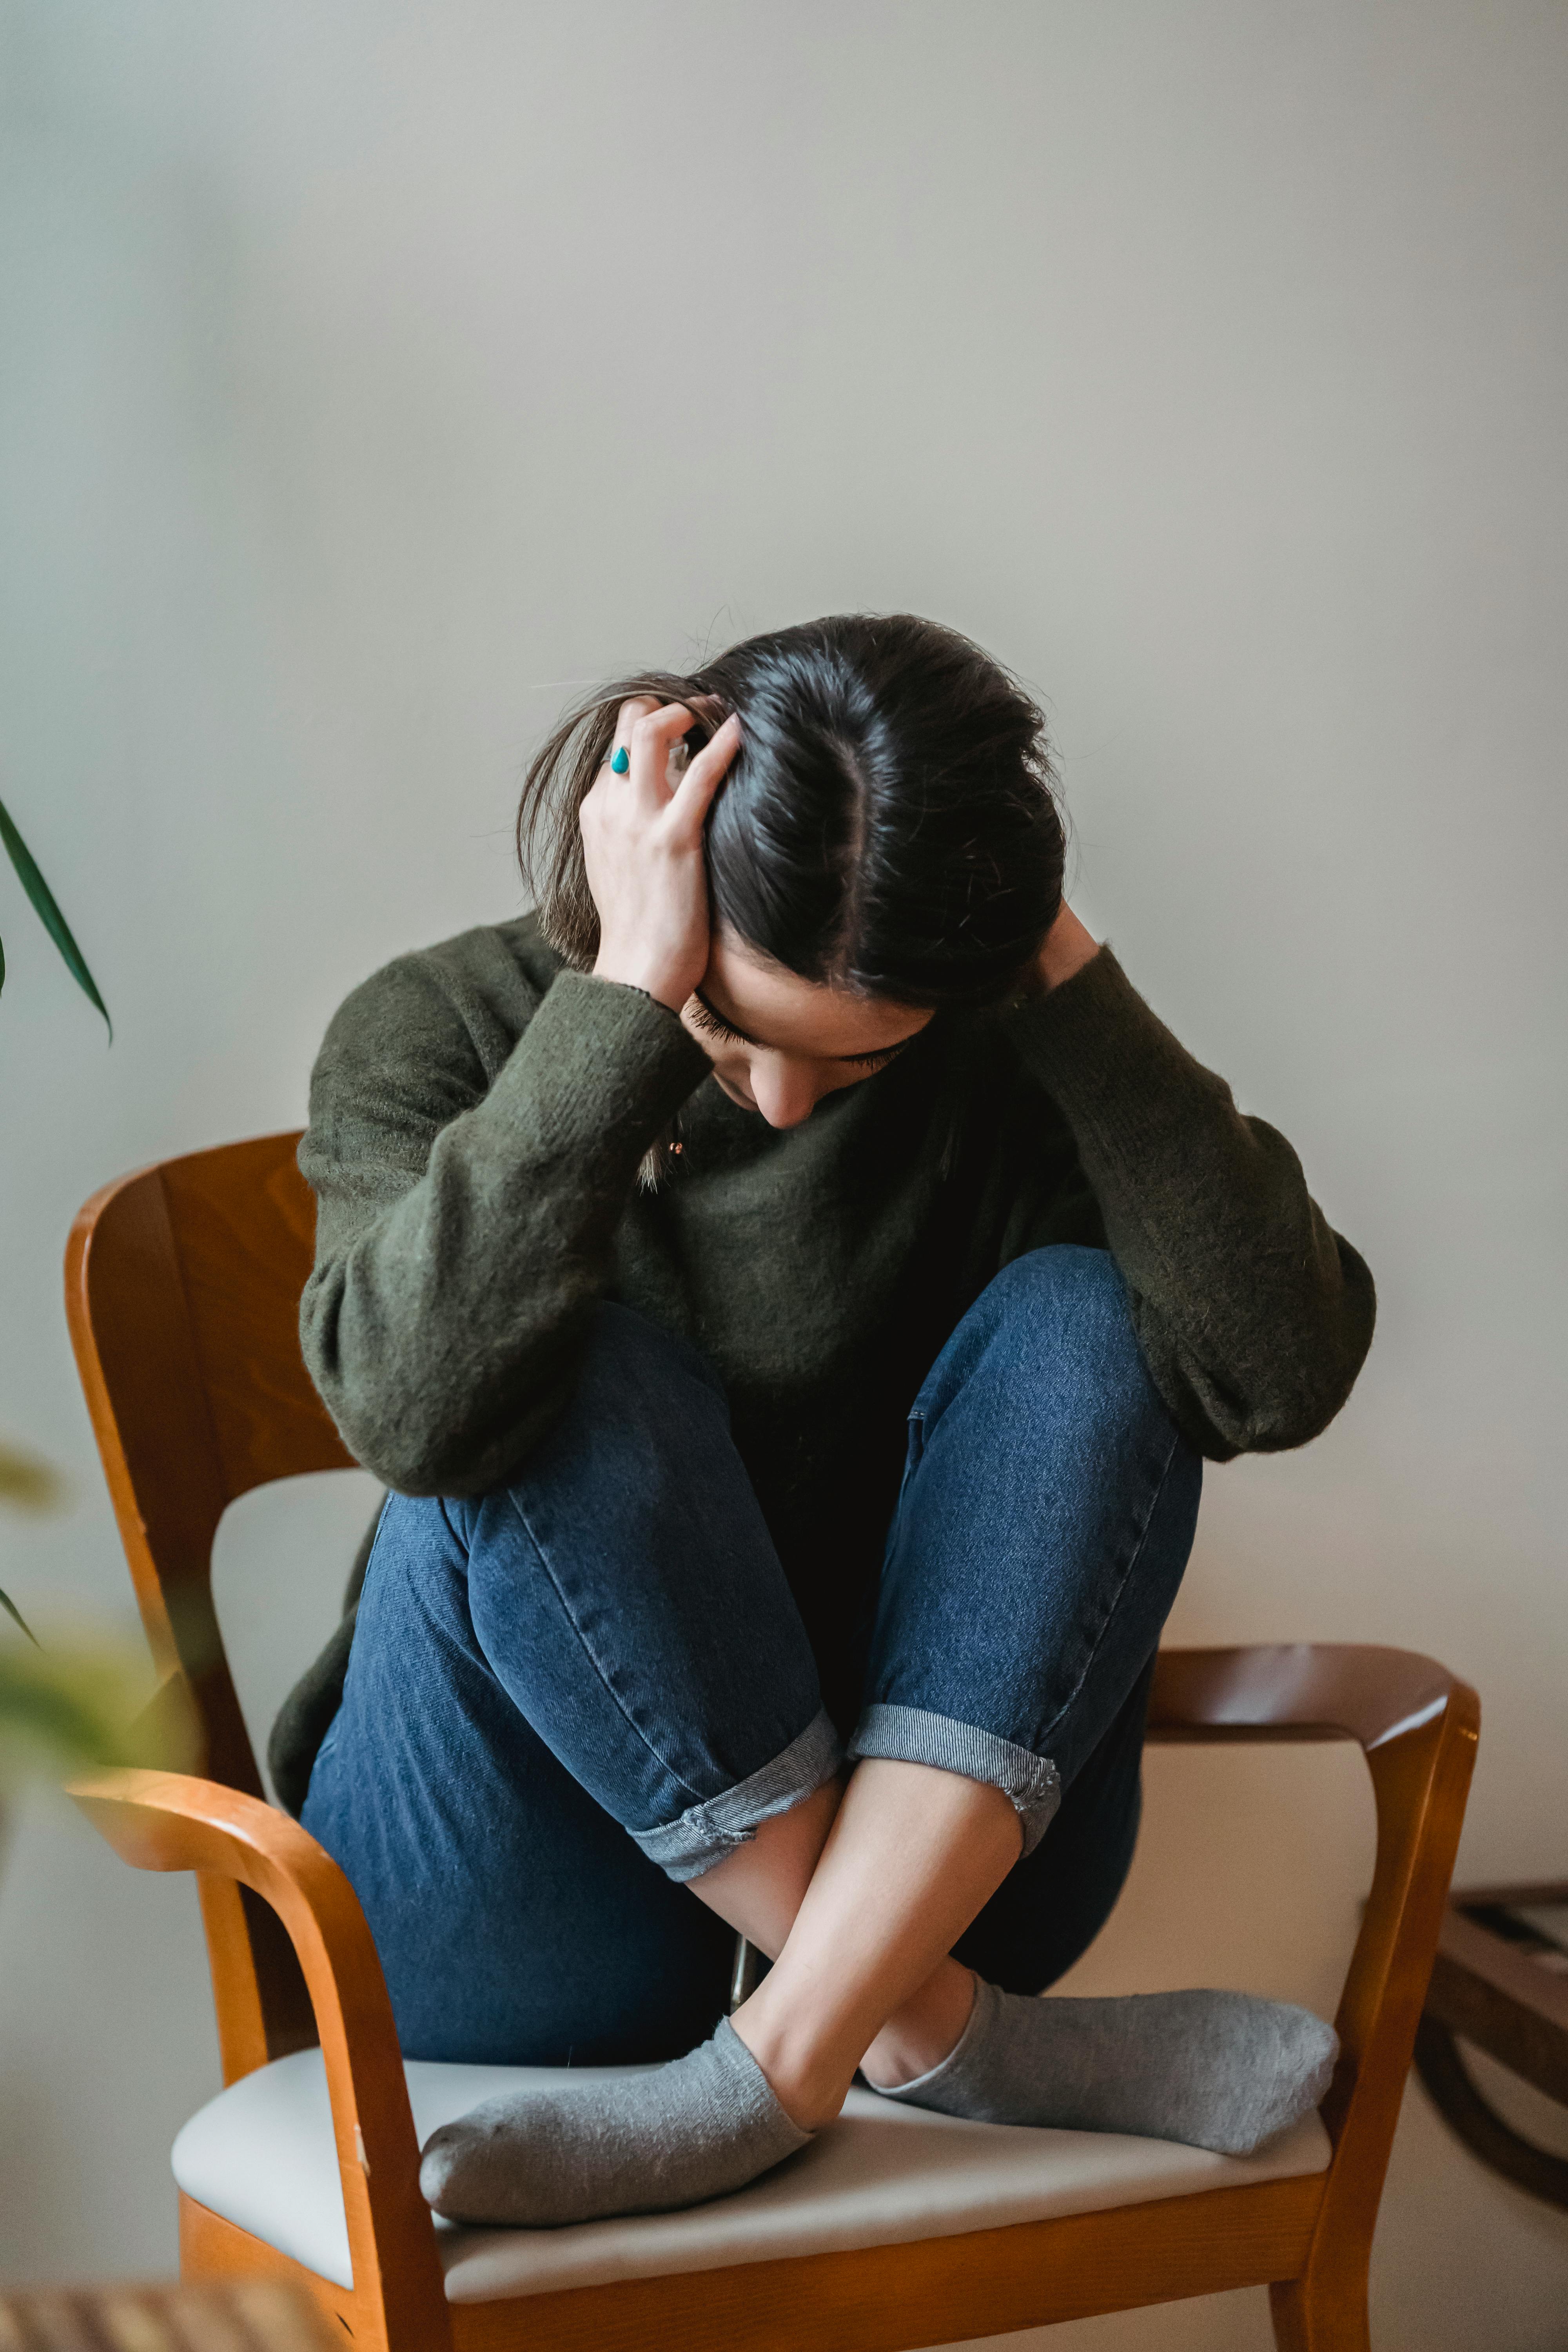 An upset young woman holding her head in her hands | Source: Pexels